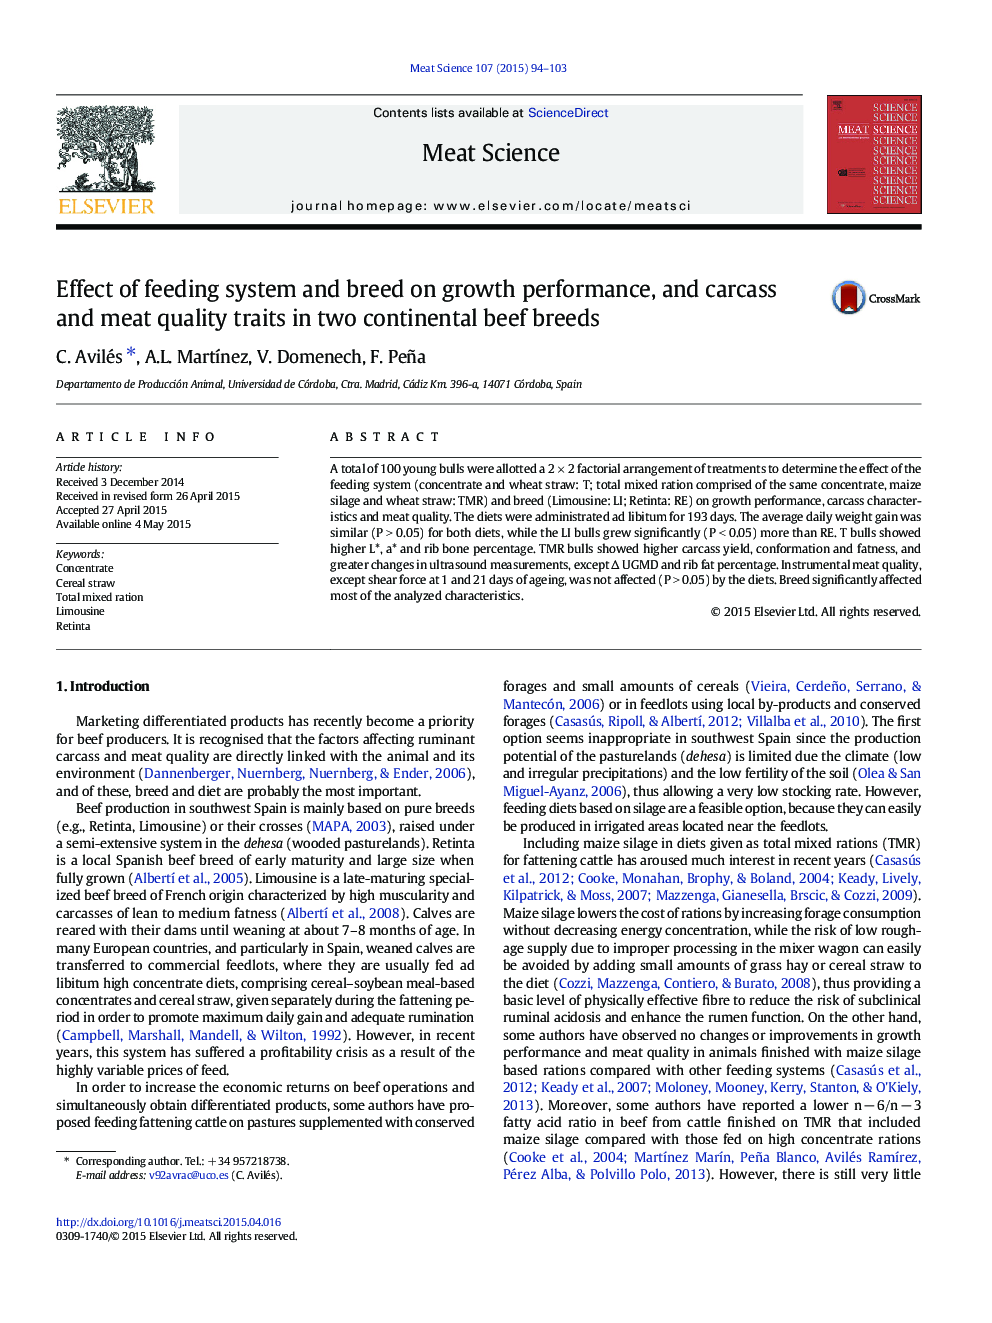 Effect of feeding system and breed on growth performance, and carcass and meat quality traits in two continental beef breeds